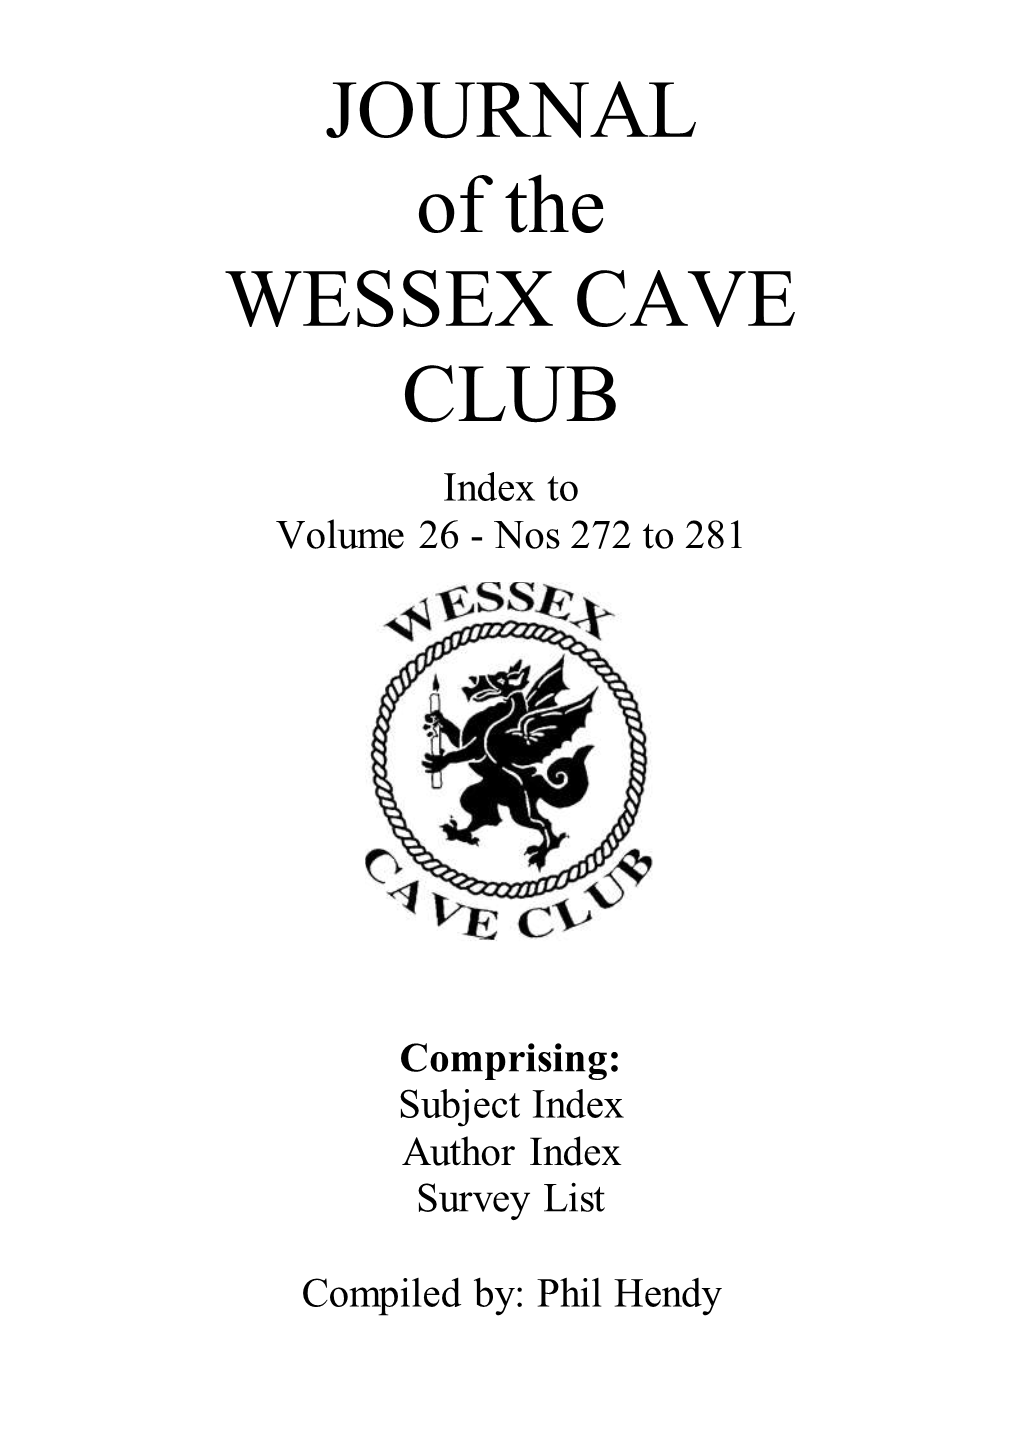 JOURNAL of the WESSEX CAVE CLUB